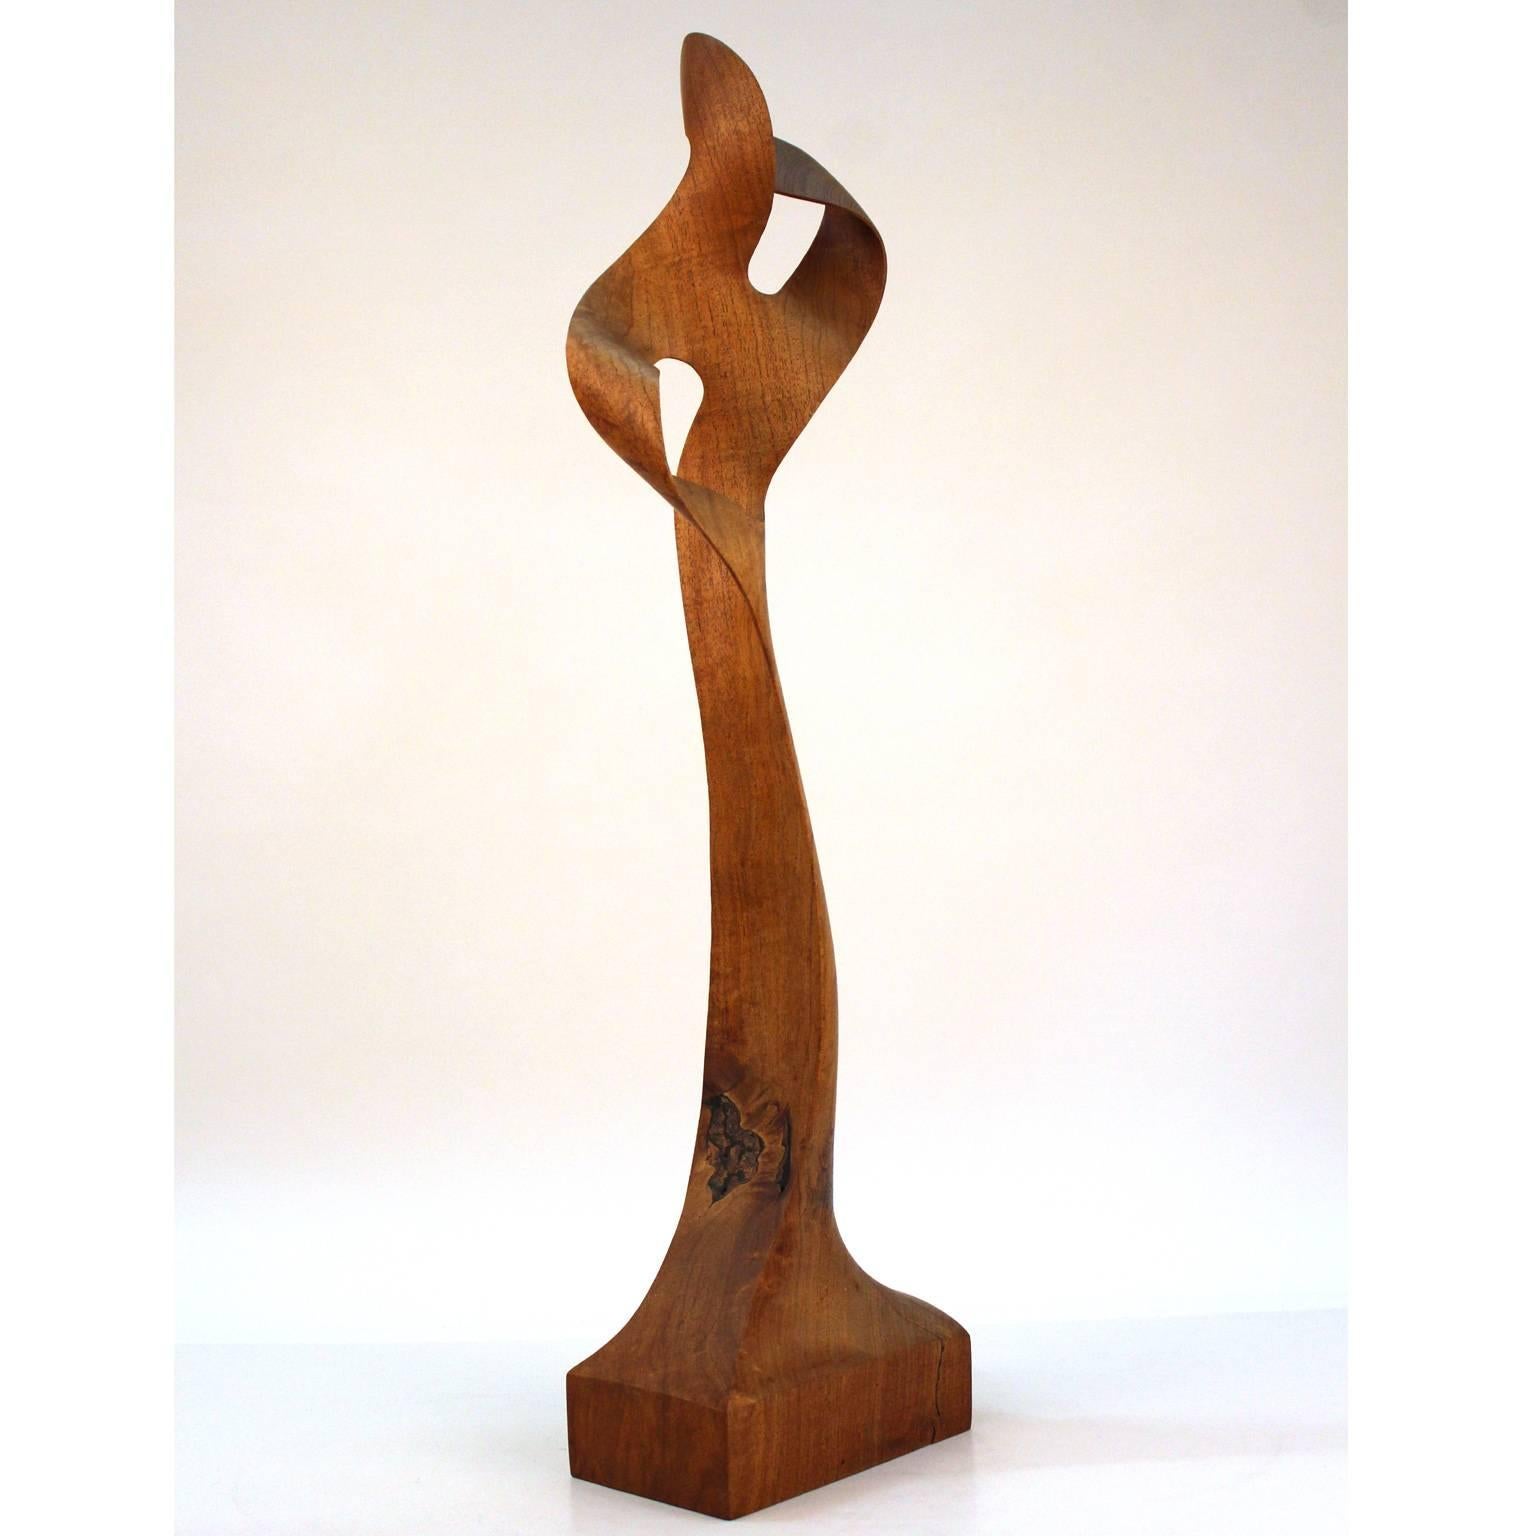 A modernist carved wood sculpture by American architect and artist Thomas E. Woodward (1932-2011). The sculpture appears to be made in American walnut and finishes at its top into a double Mobius band. Excellent original condition, signed on bottom